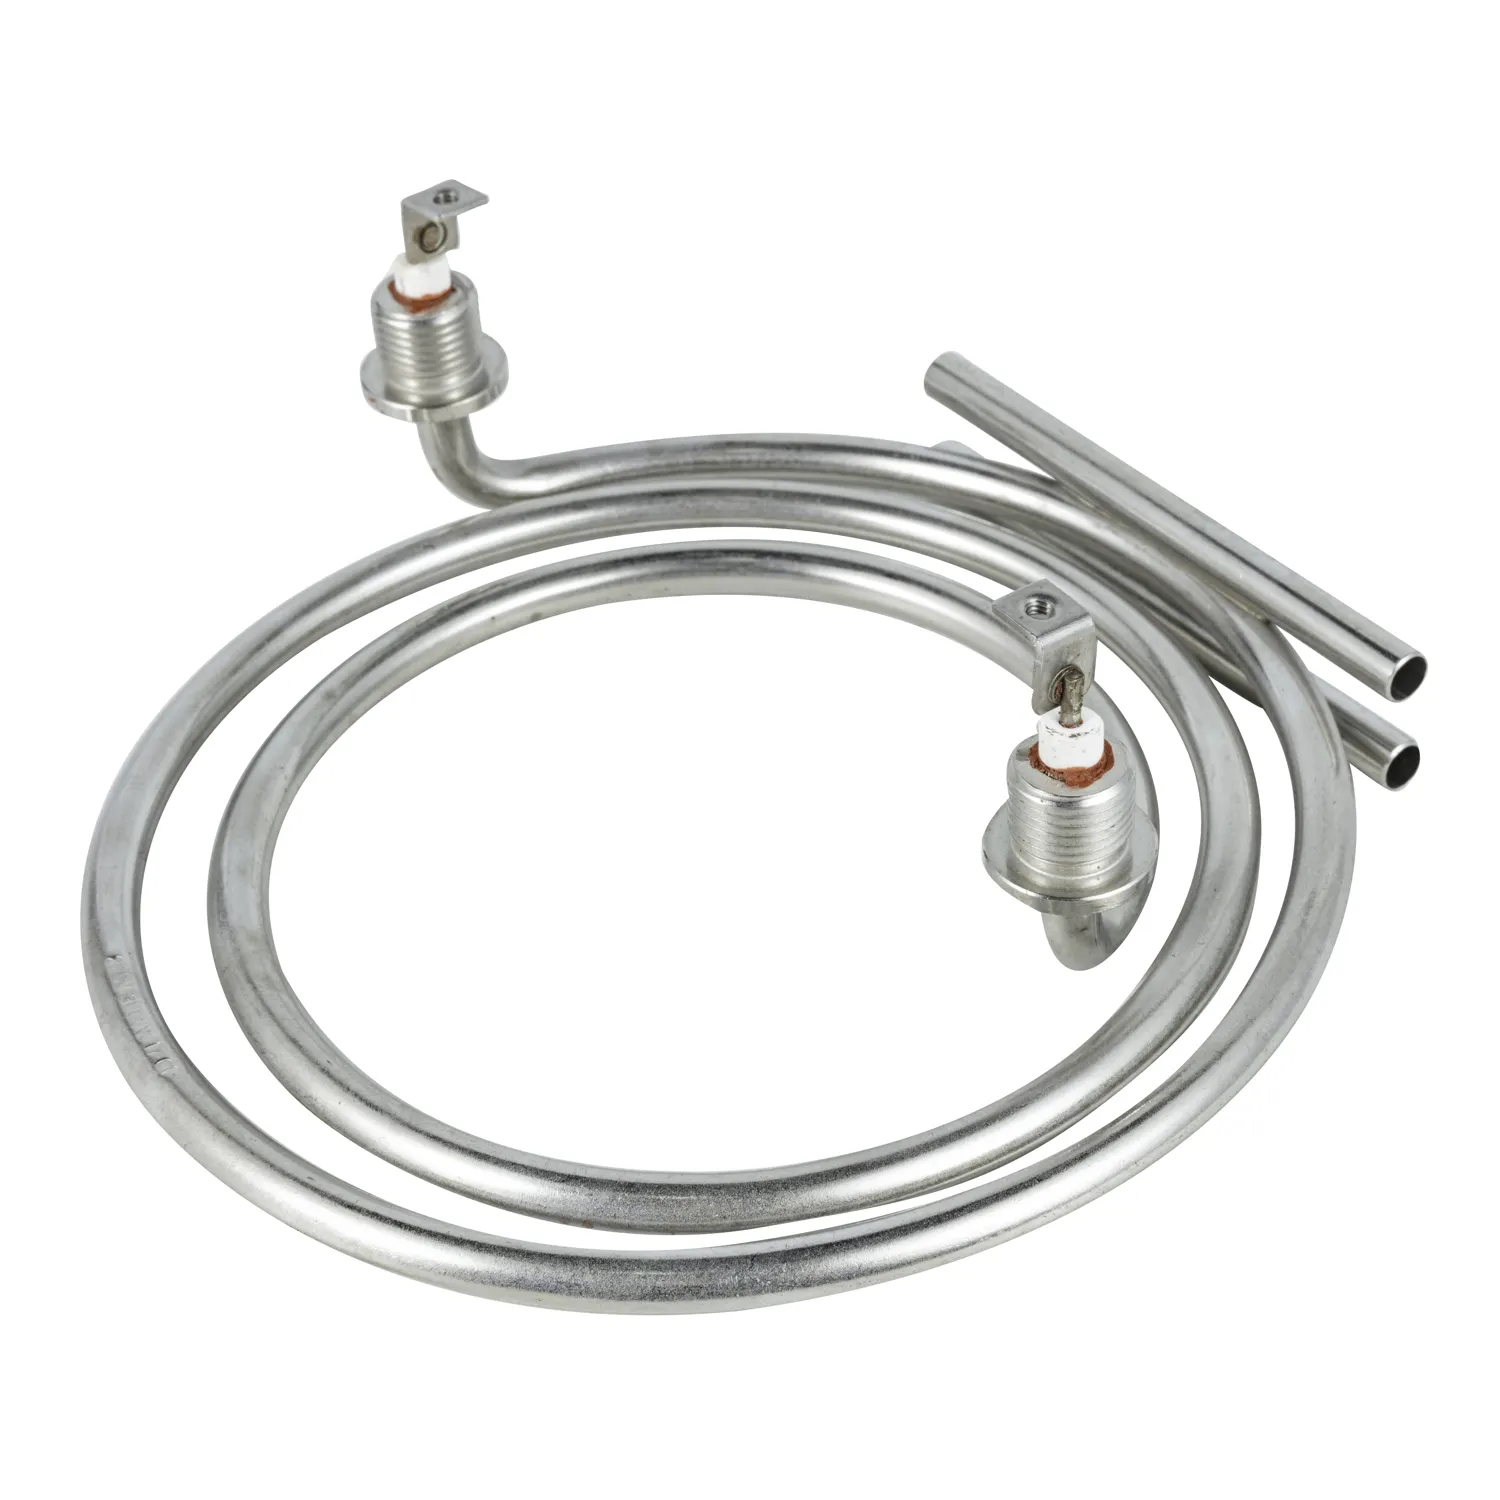 Stainless Steel Electric Tubular Heating Element Coil Air Heater for Toaster Oven Rolling Oven